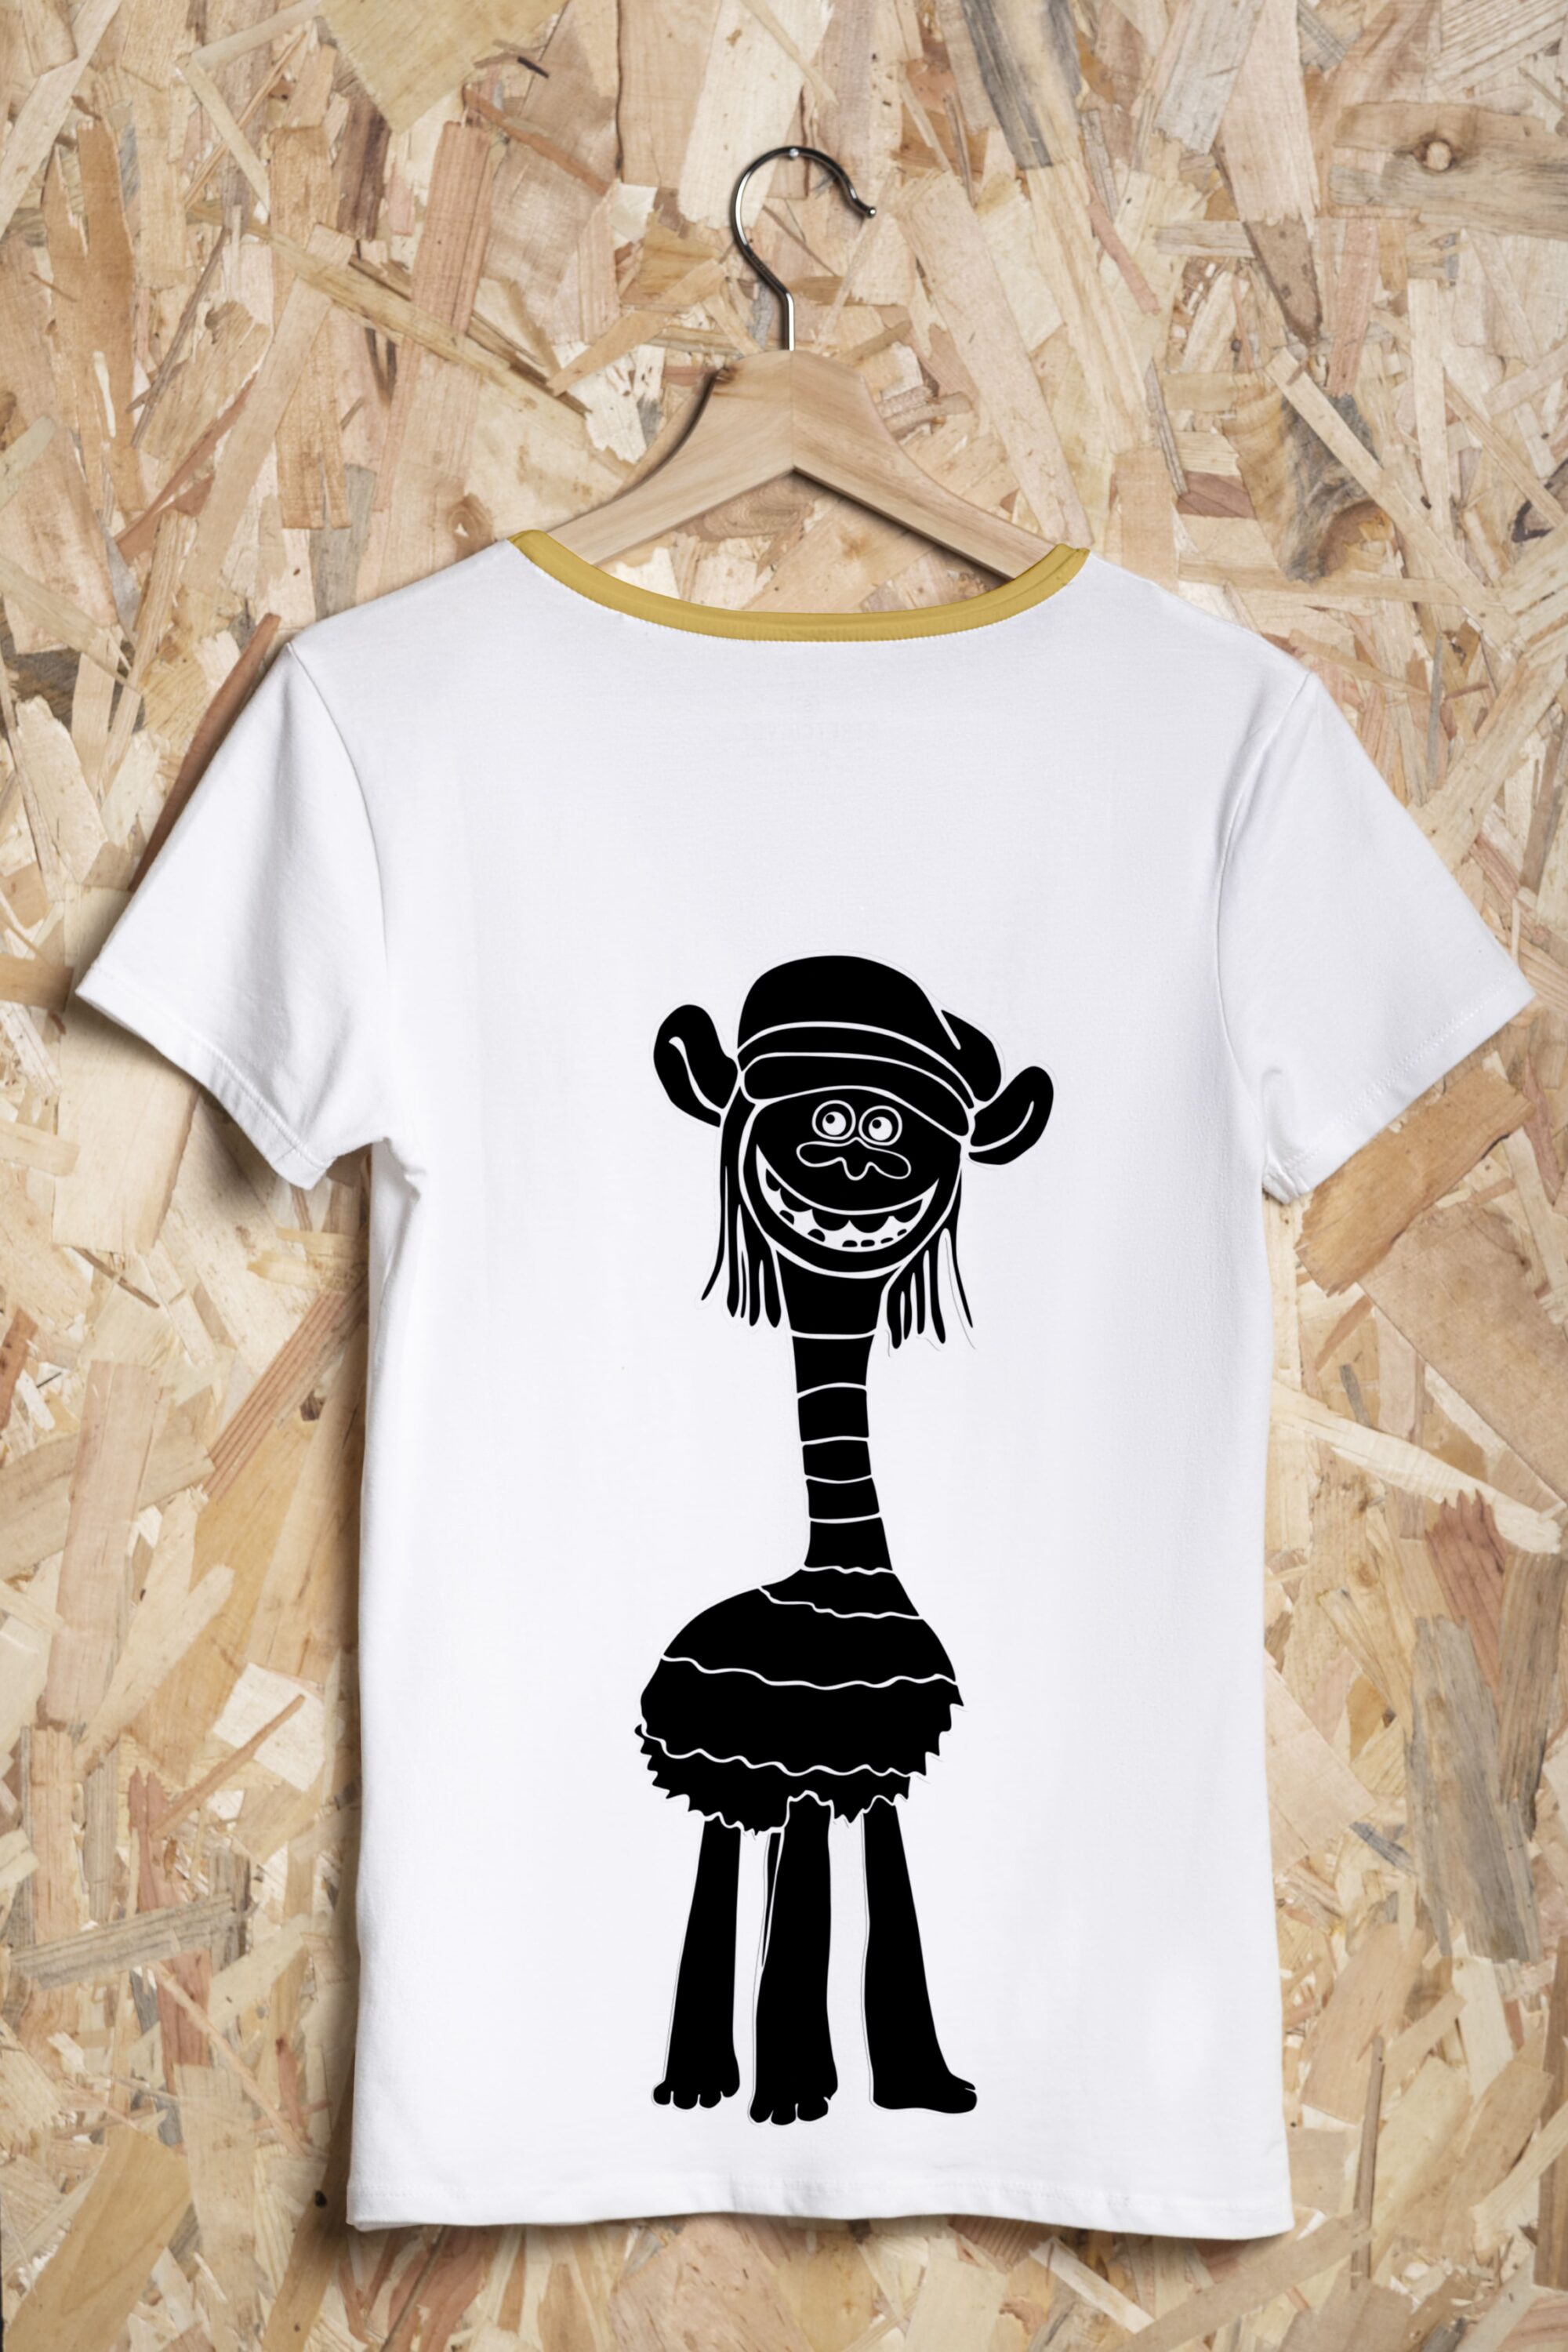 White T-shirt with dirty yellow collar and a monochrome image of a cartoon character - Cooper.